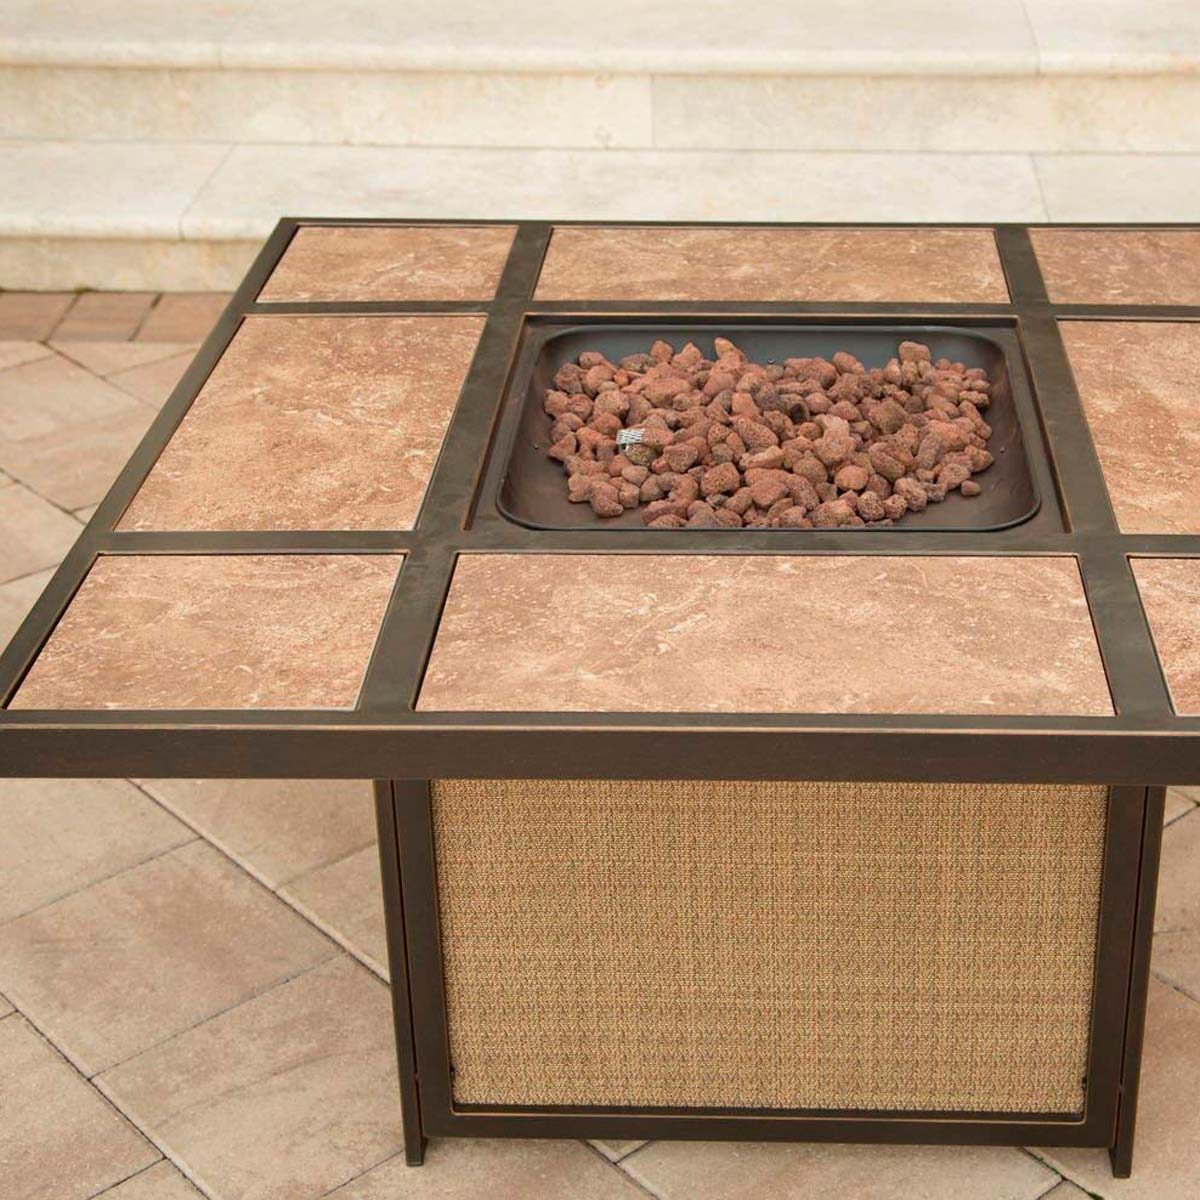 10 Really Cool Gas Fire Pits for Your Backyard: Propane ...